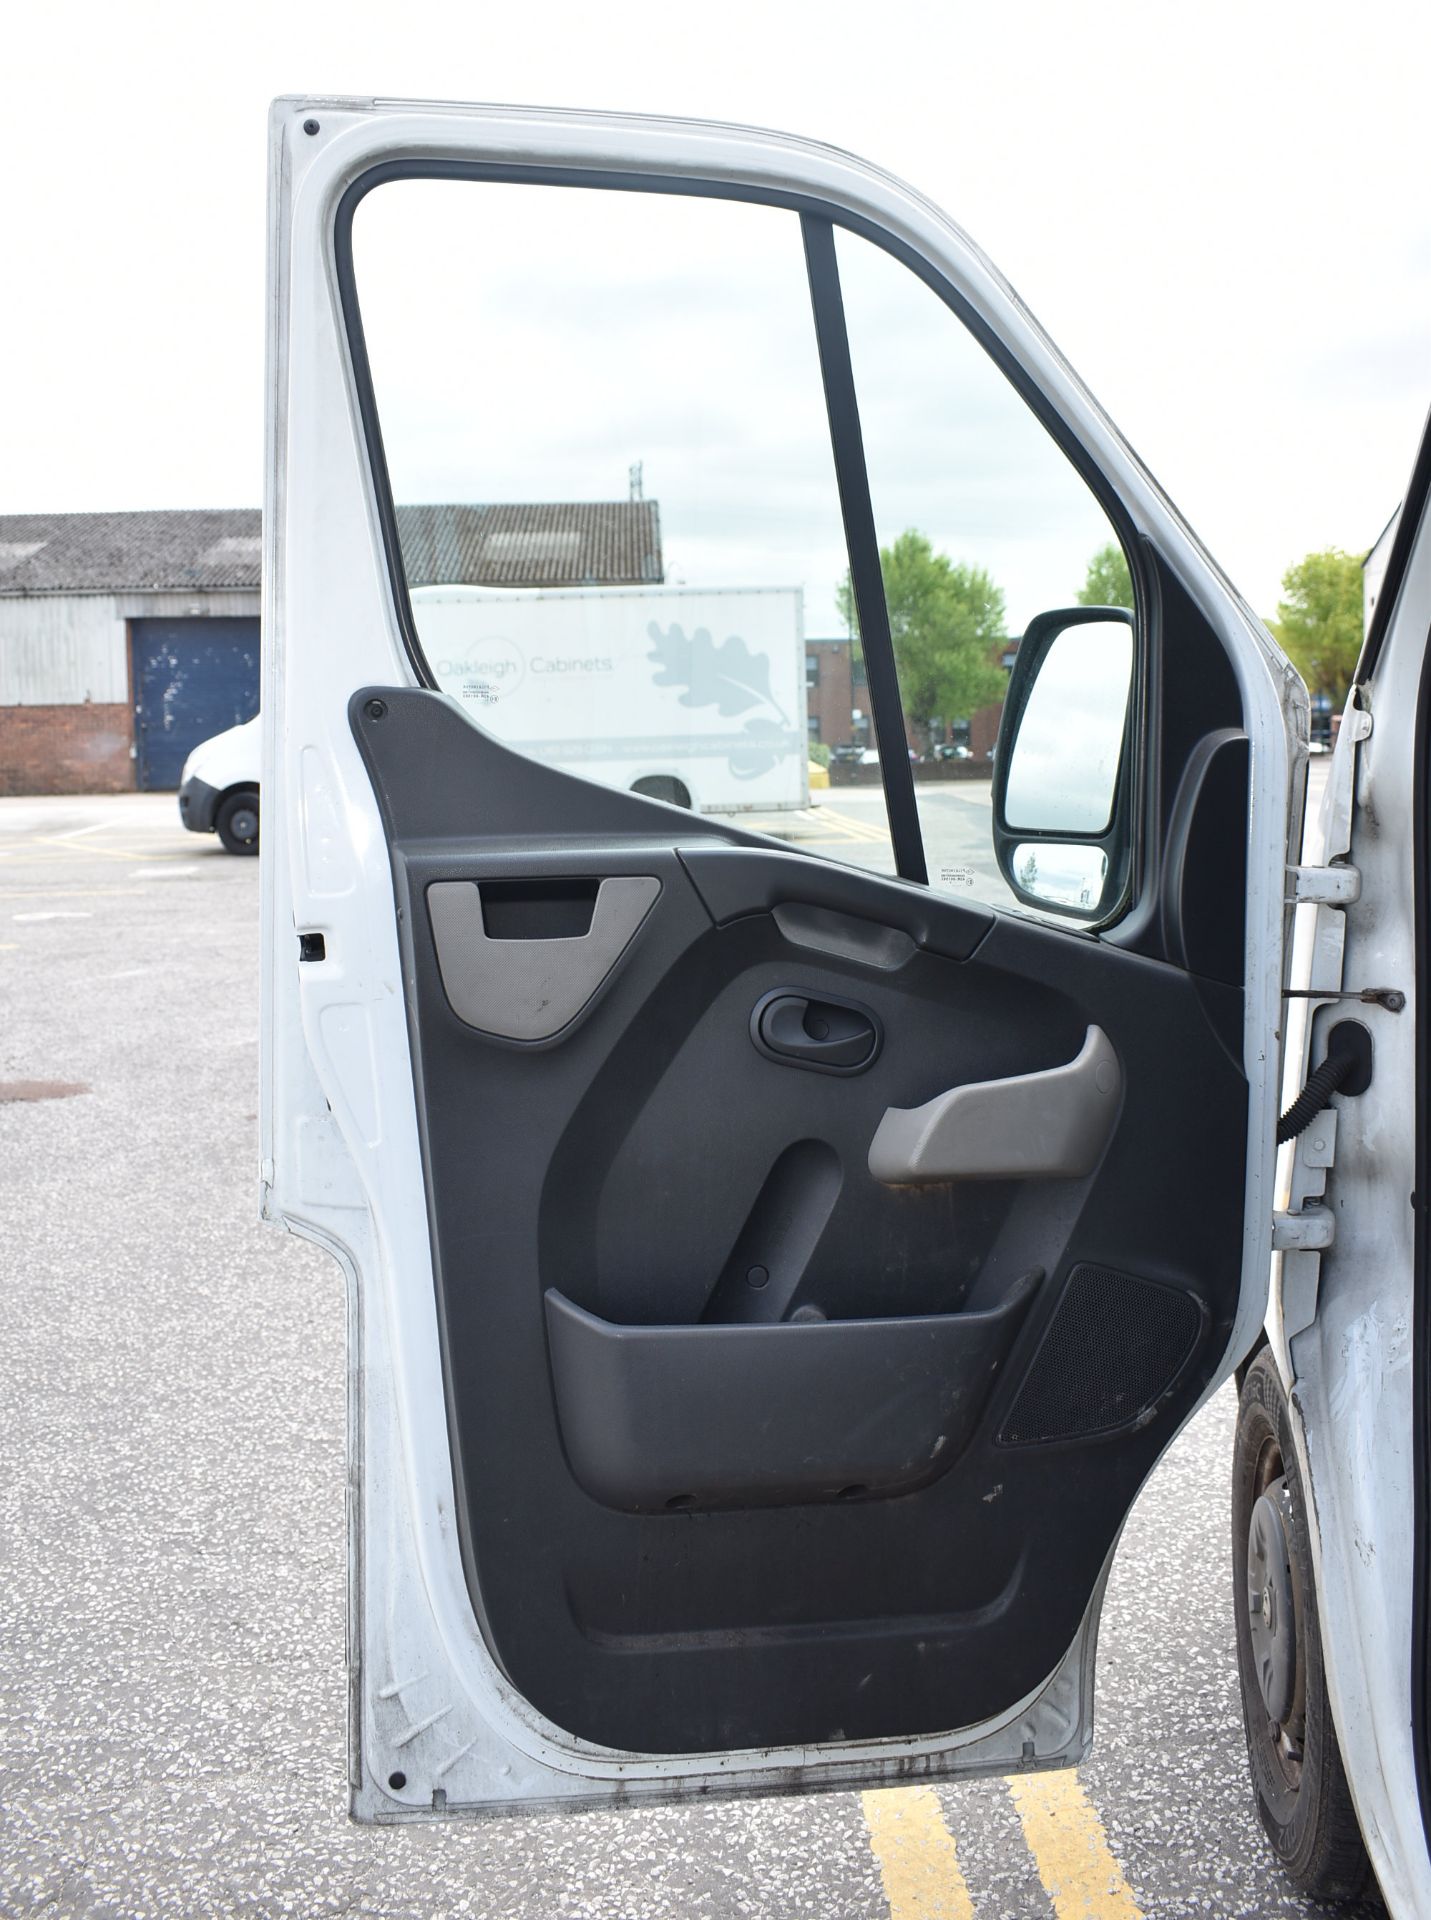 1 x Vauxhall Movano Box Van With Tail lift - 14 Plate - Includes 2 Keys - CL011 - Location: - Image 72 of 83